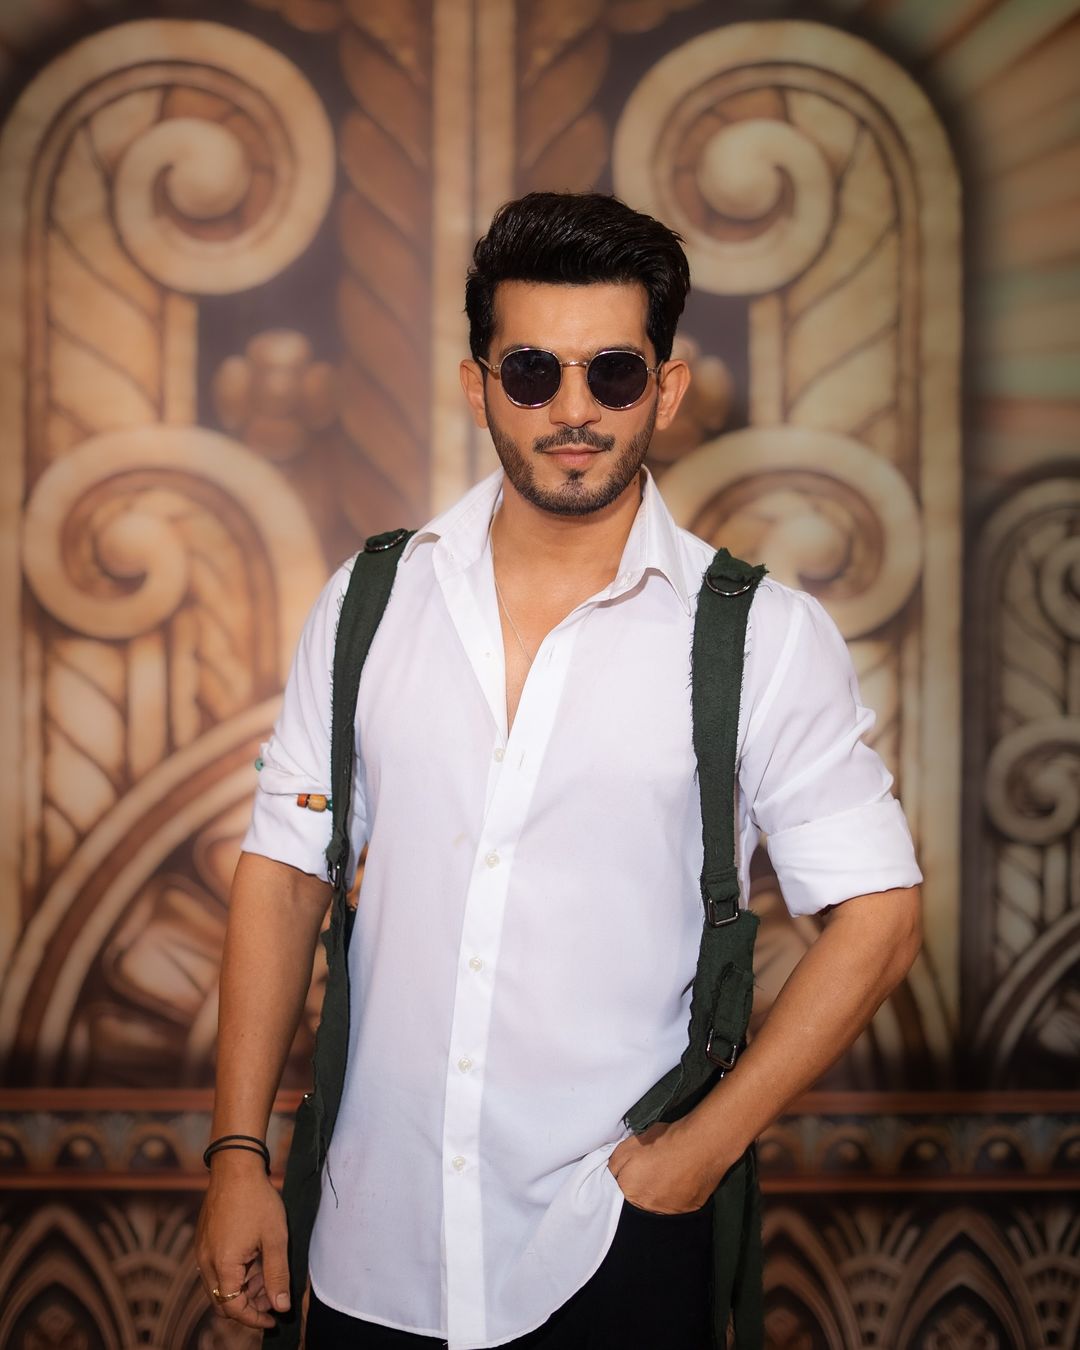 Laughter Chefs Family Special Episode! Arjun Bijlani Shares Behind-the-Scene Glimpses That Treat You!